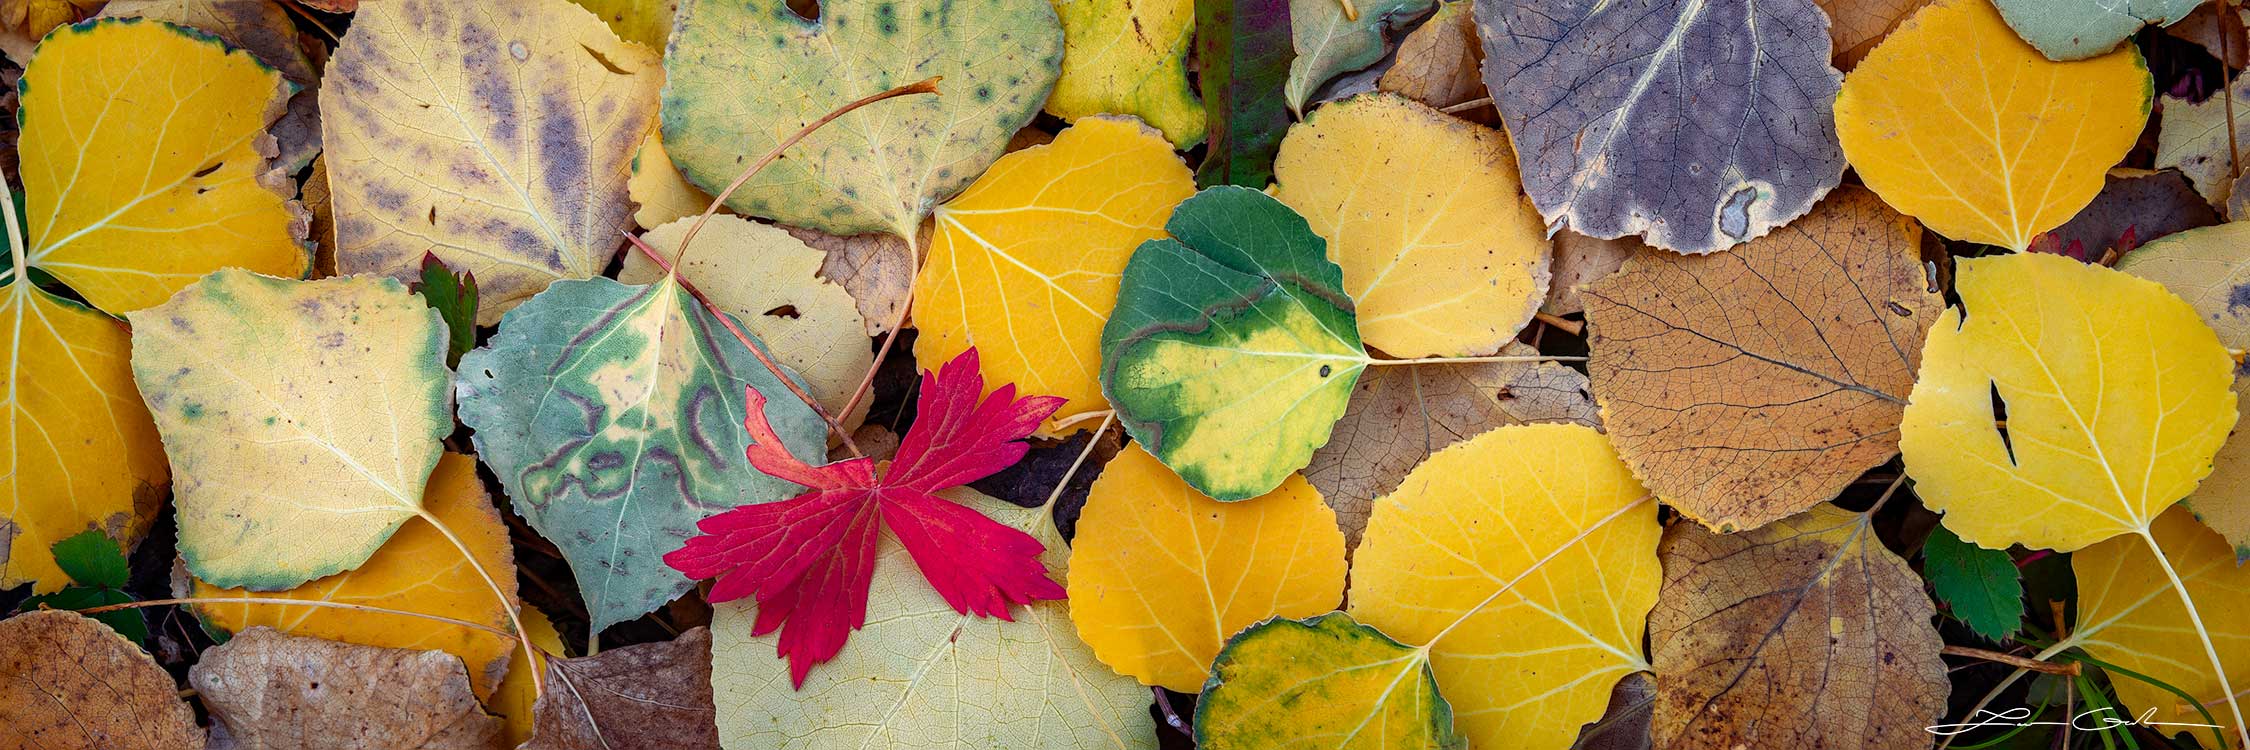 A close-up panorama of fall color aspen leaves and foliage